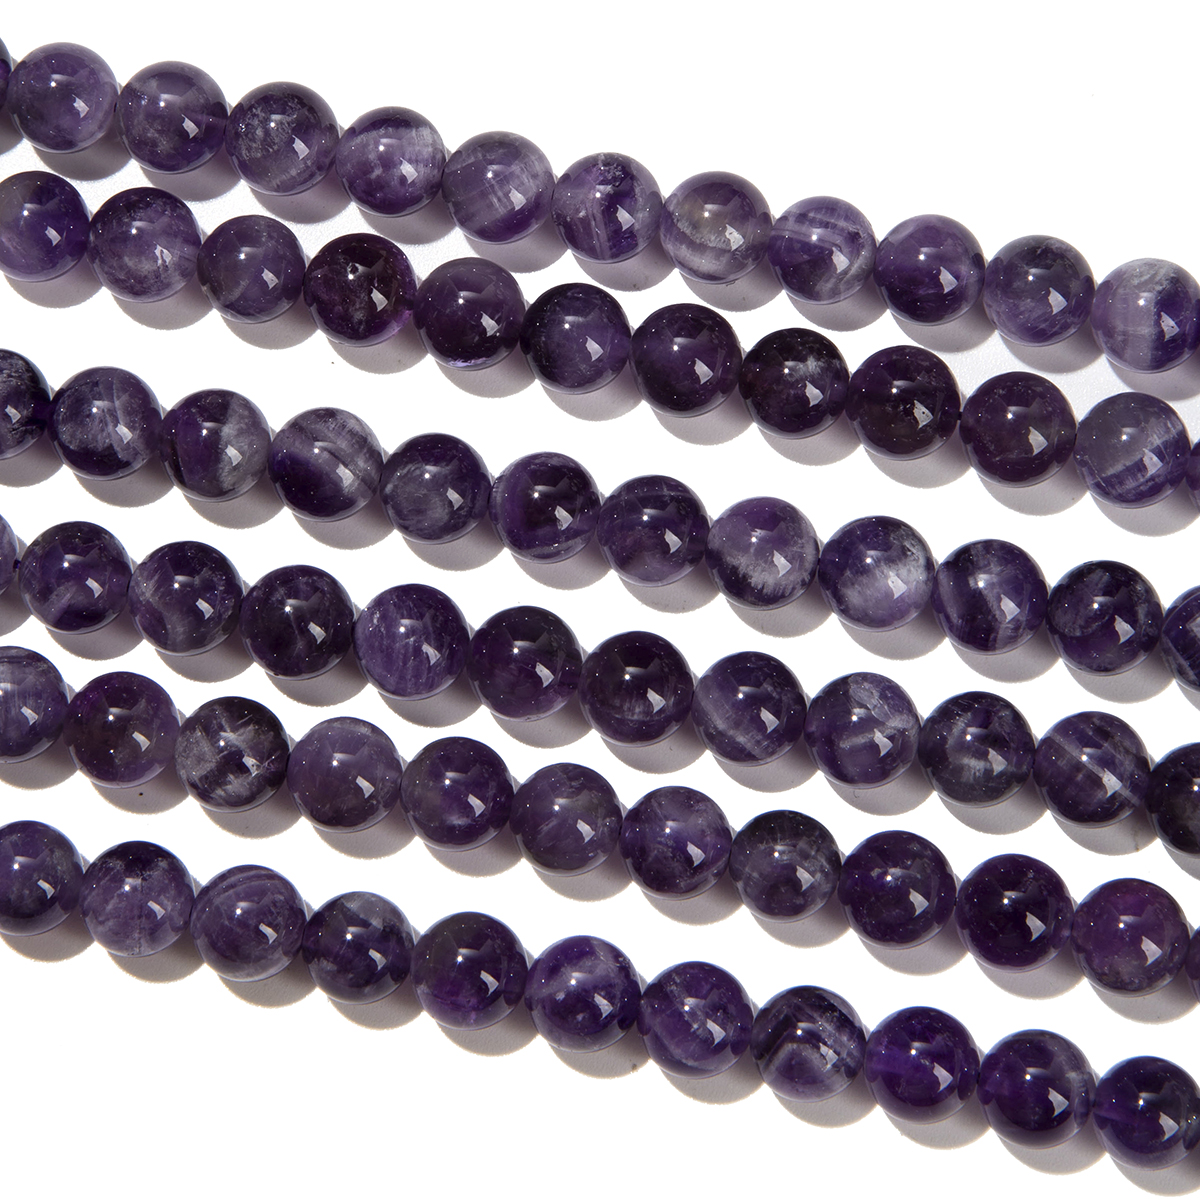 Tapered Amethyst A 10mm pearls on string